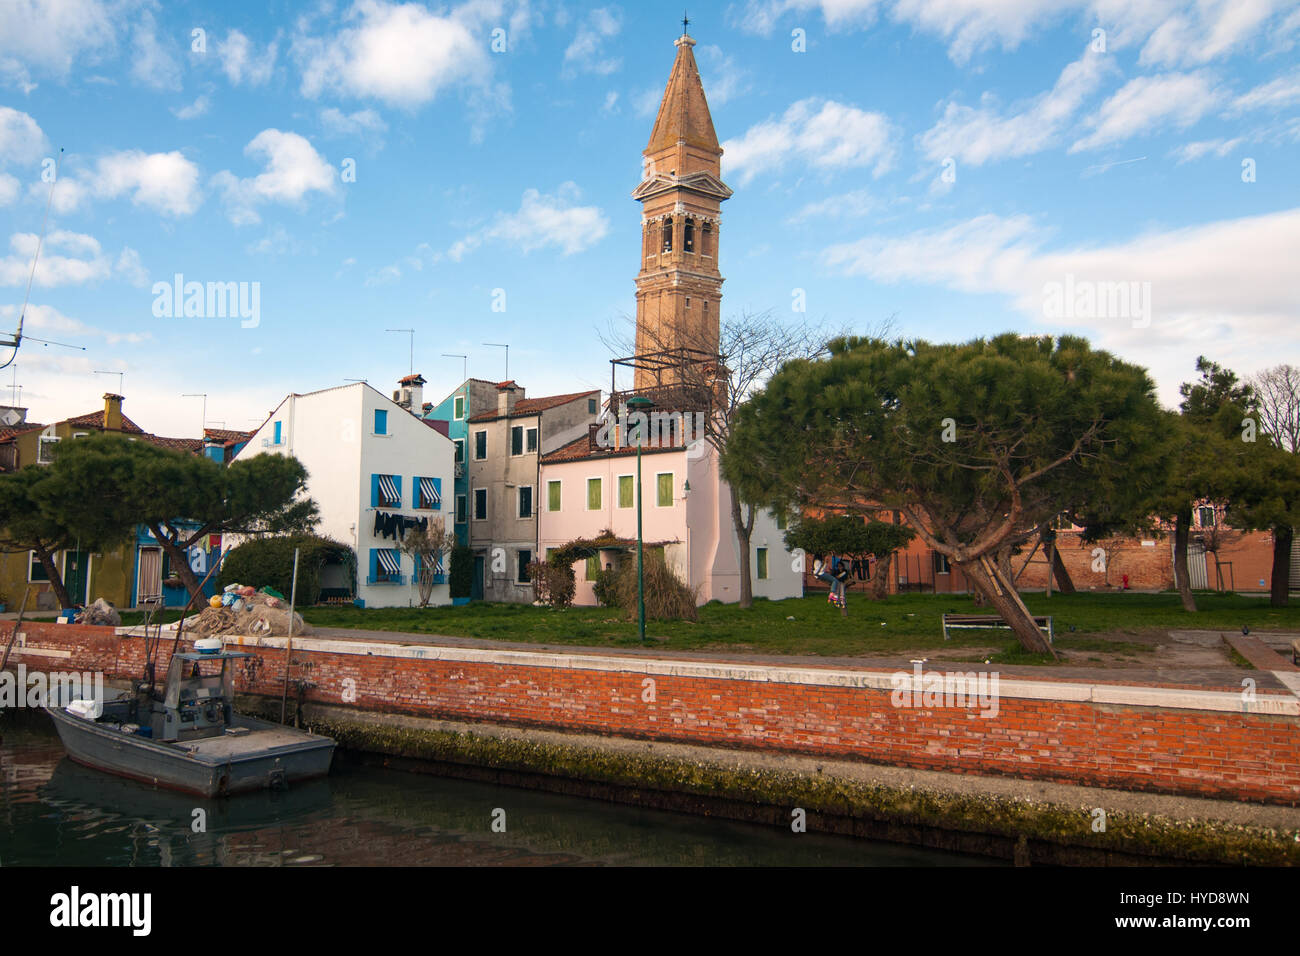 Houses, a canal and the tower bell of the island of Burano, Venice, Italy. Stock Photo